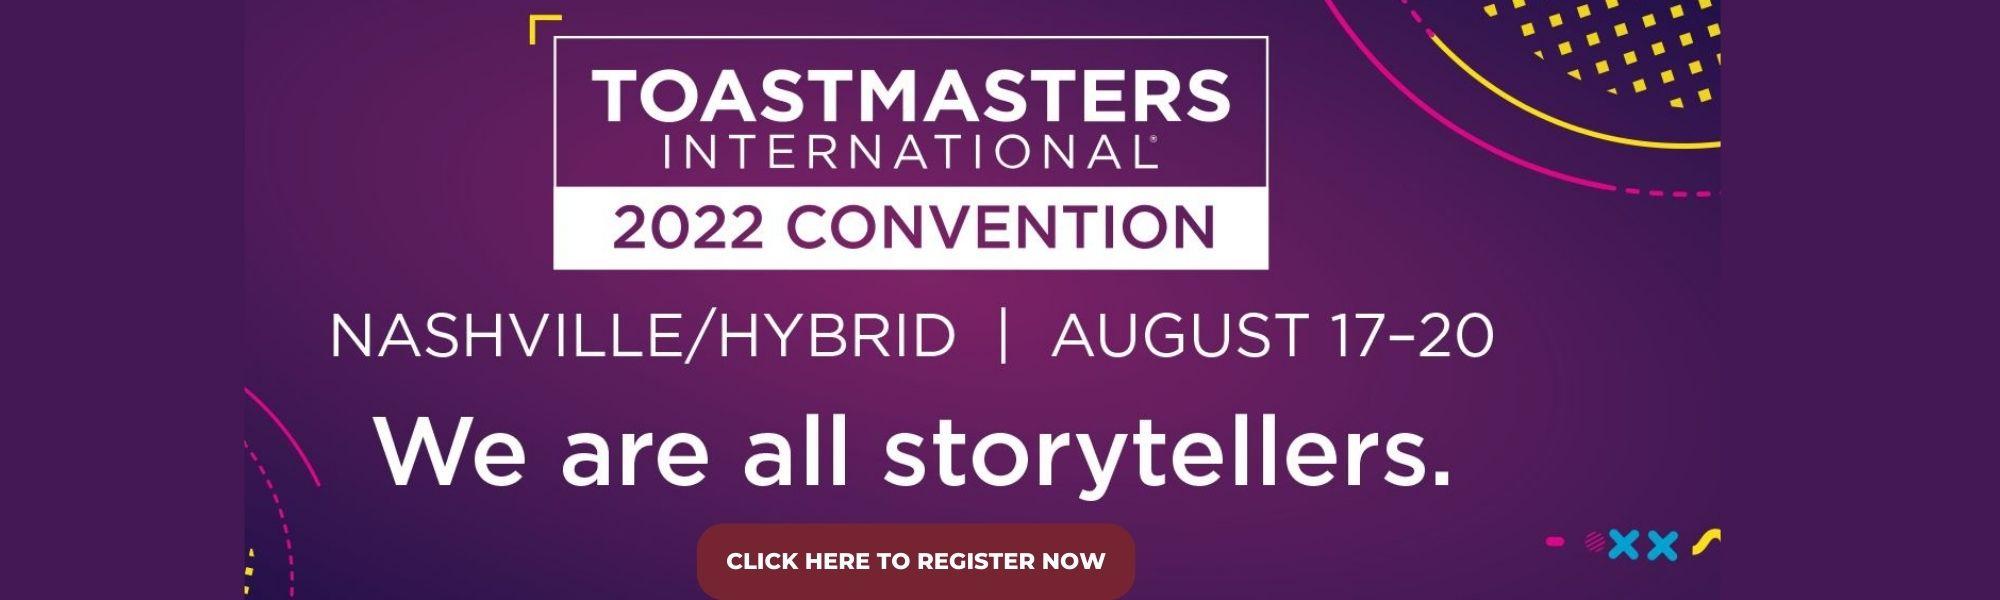 Toastmasters International 2022 Convention